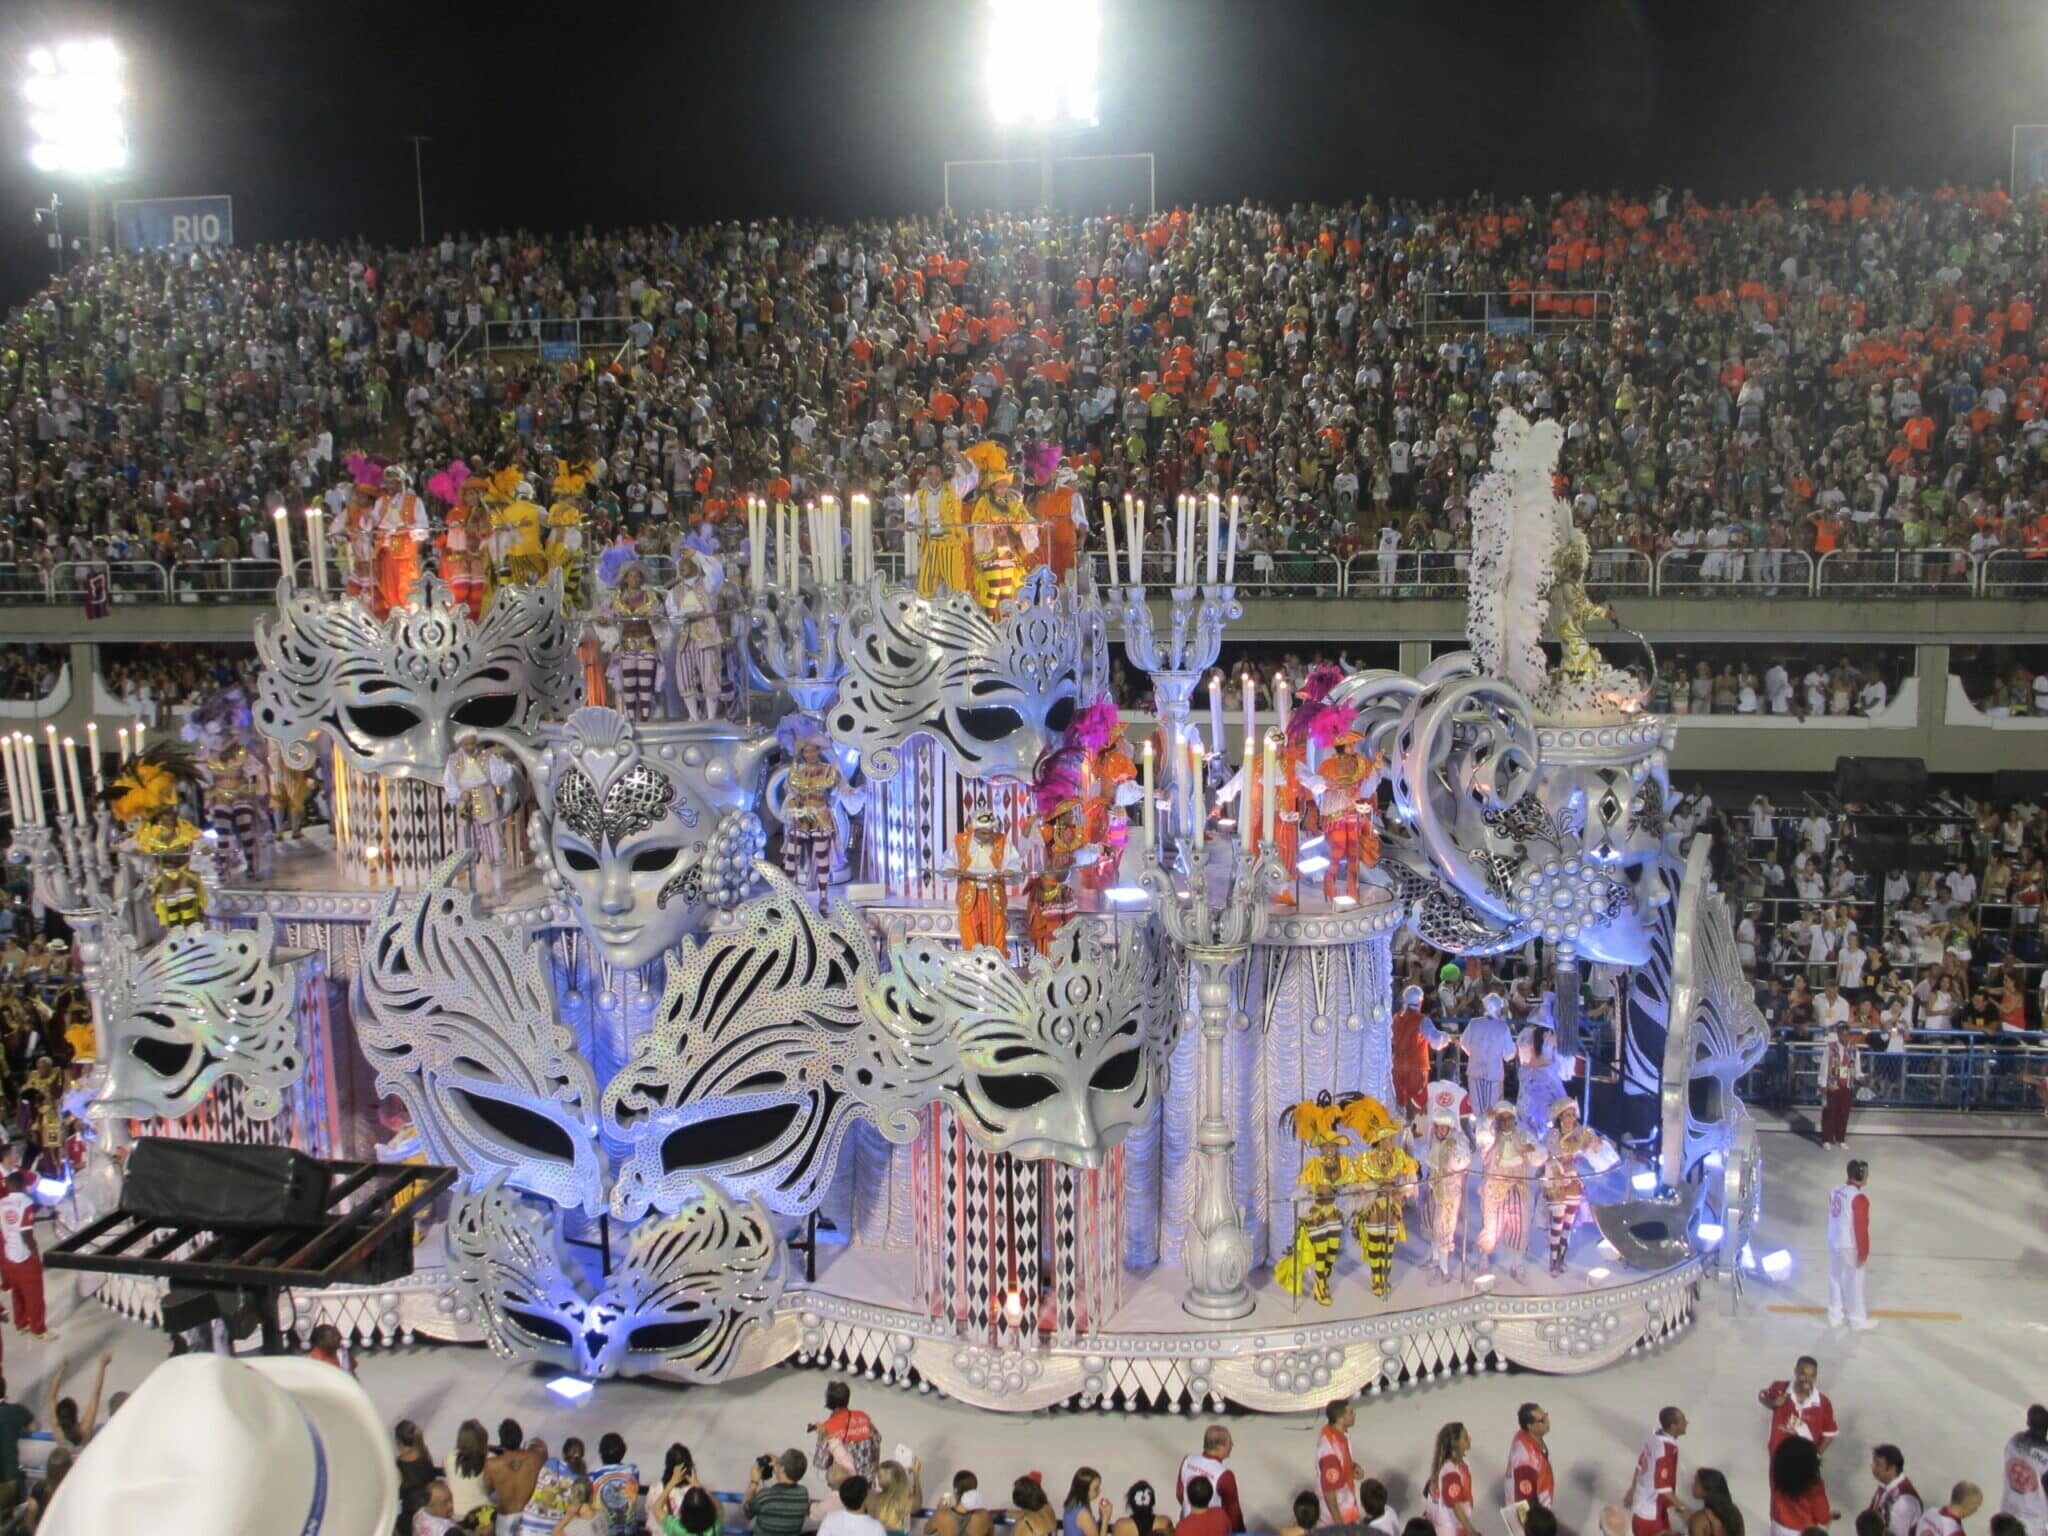 Does Rio celebrate the best Carnival in the world?